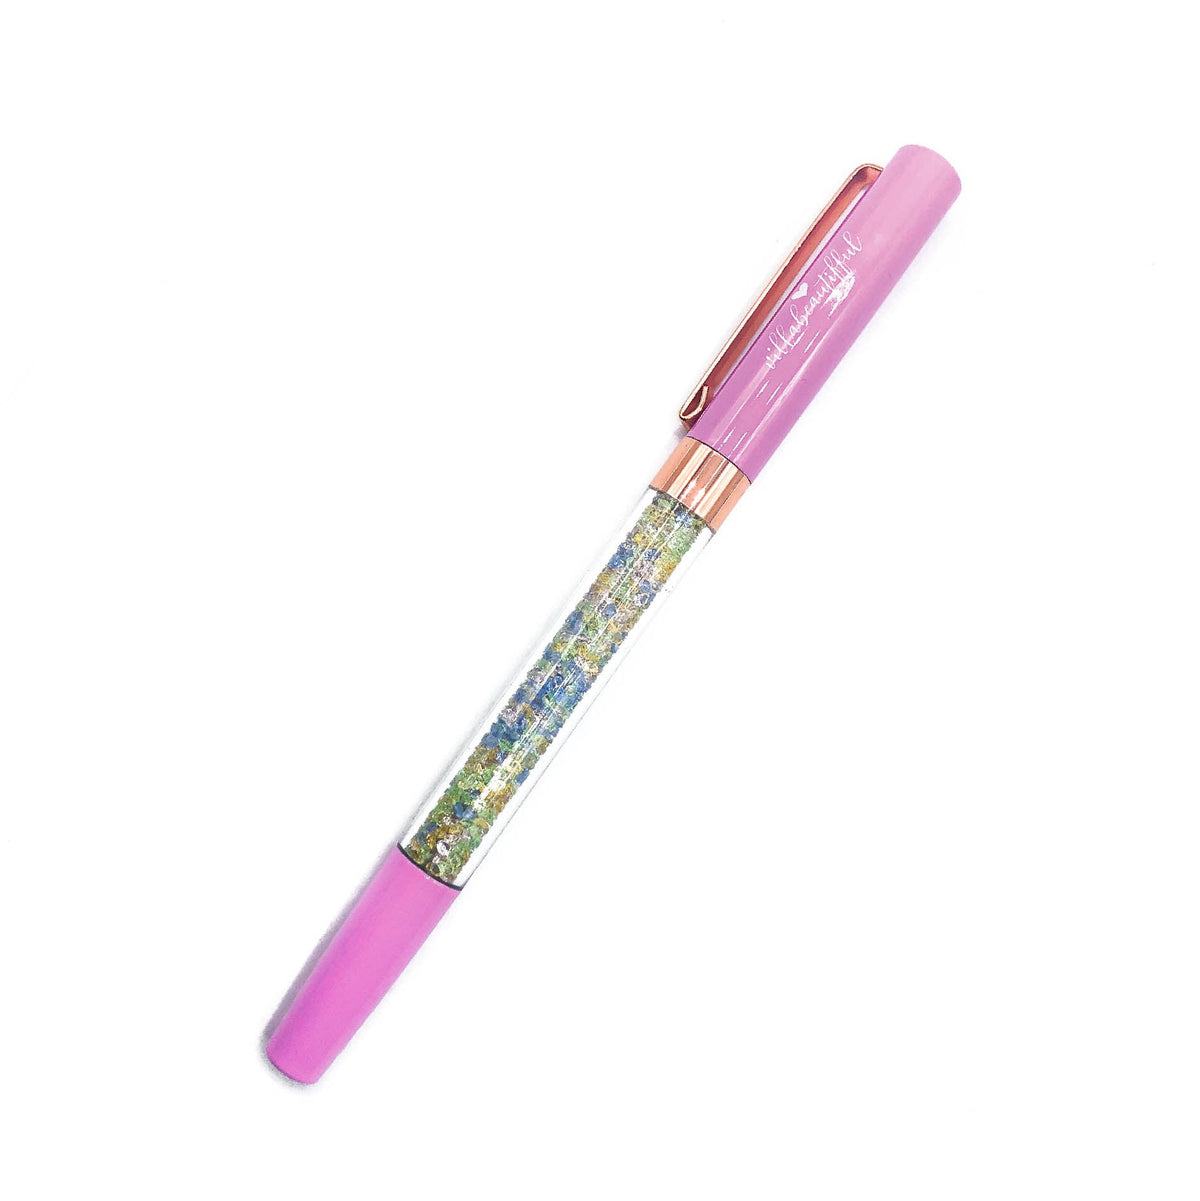 Whimsical Rainbow Imperfect Crystal VBPen | limited kit pen